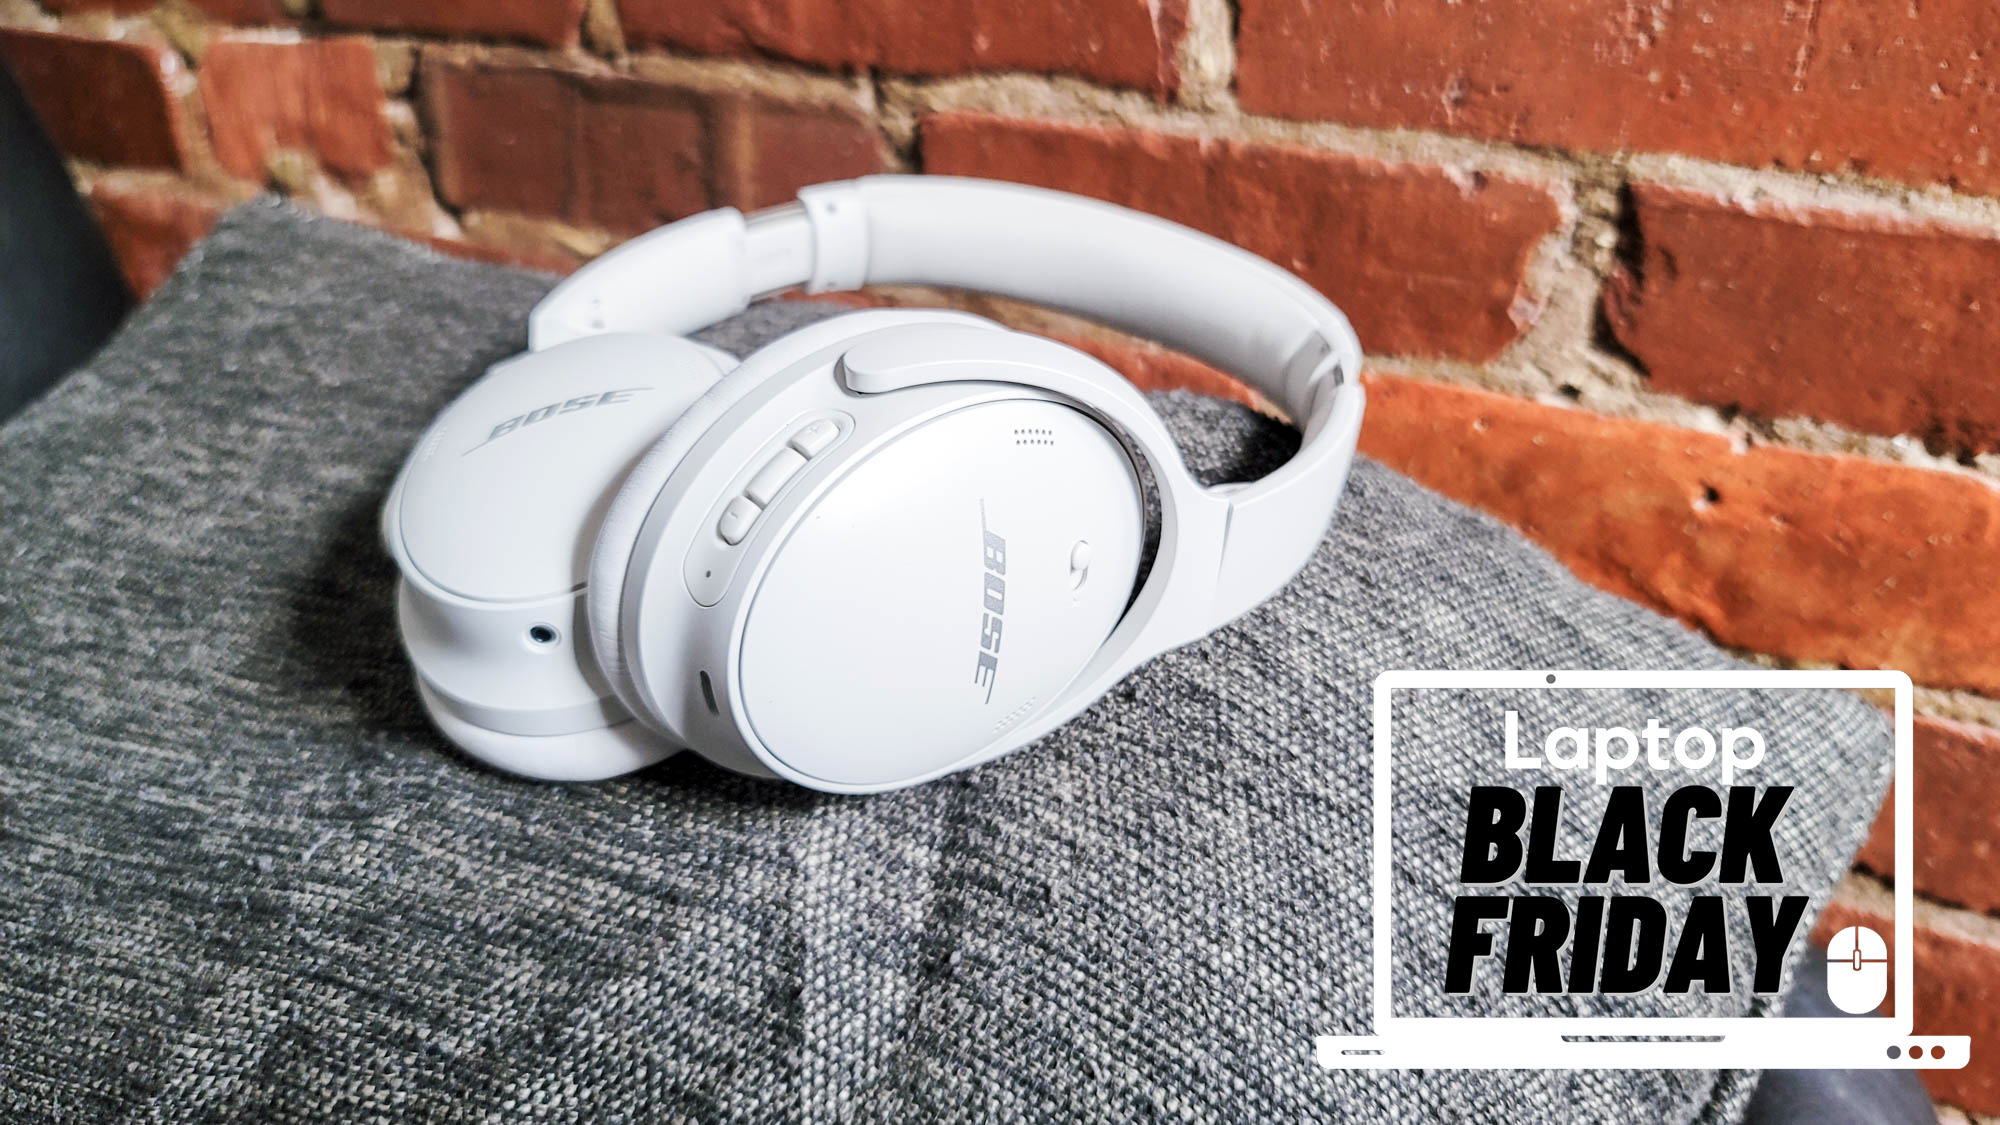 I just bought these QuietComfort Mag | its lowest price SE Bose for ever Laptop 45 headphones